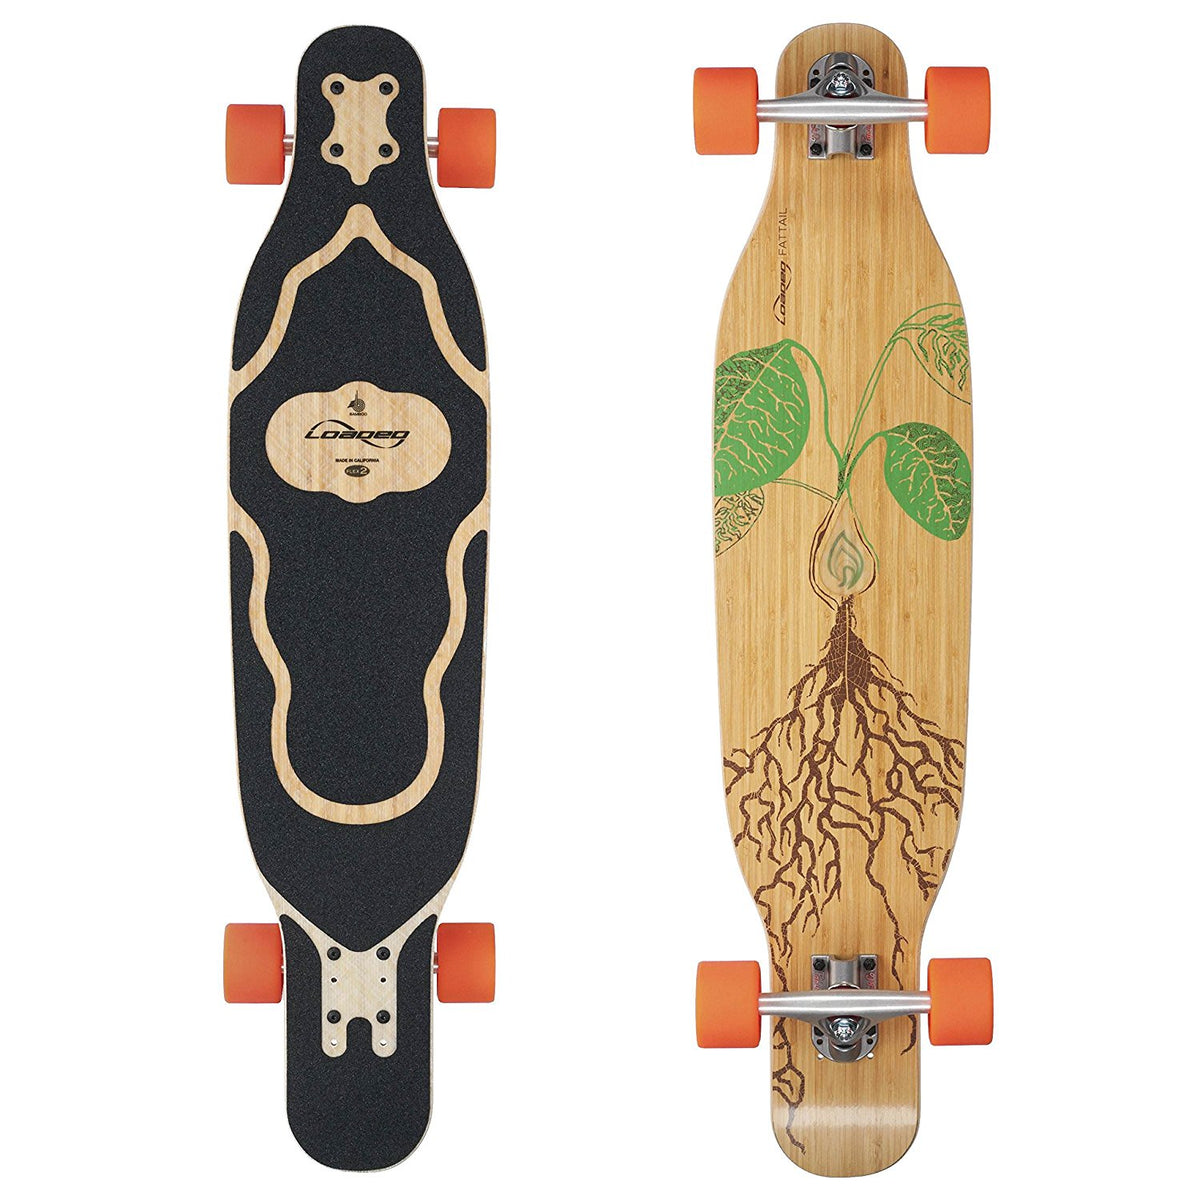 Loaded Fattail Longboard, Deck and Complete